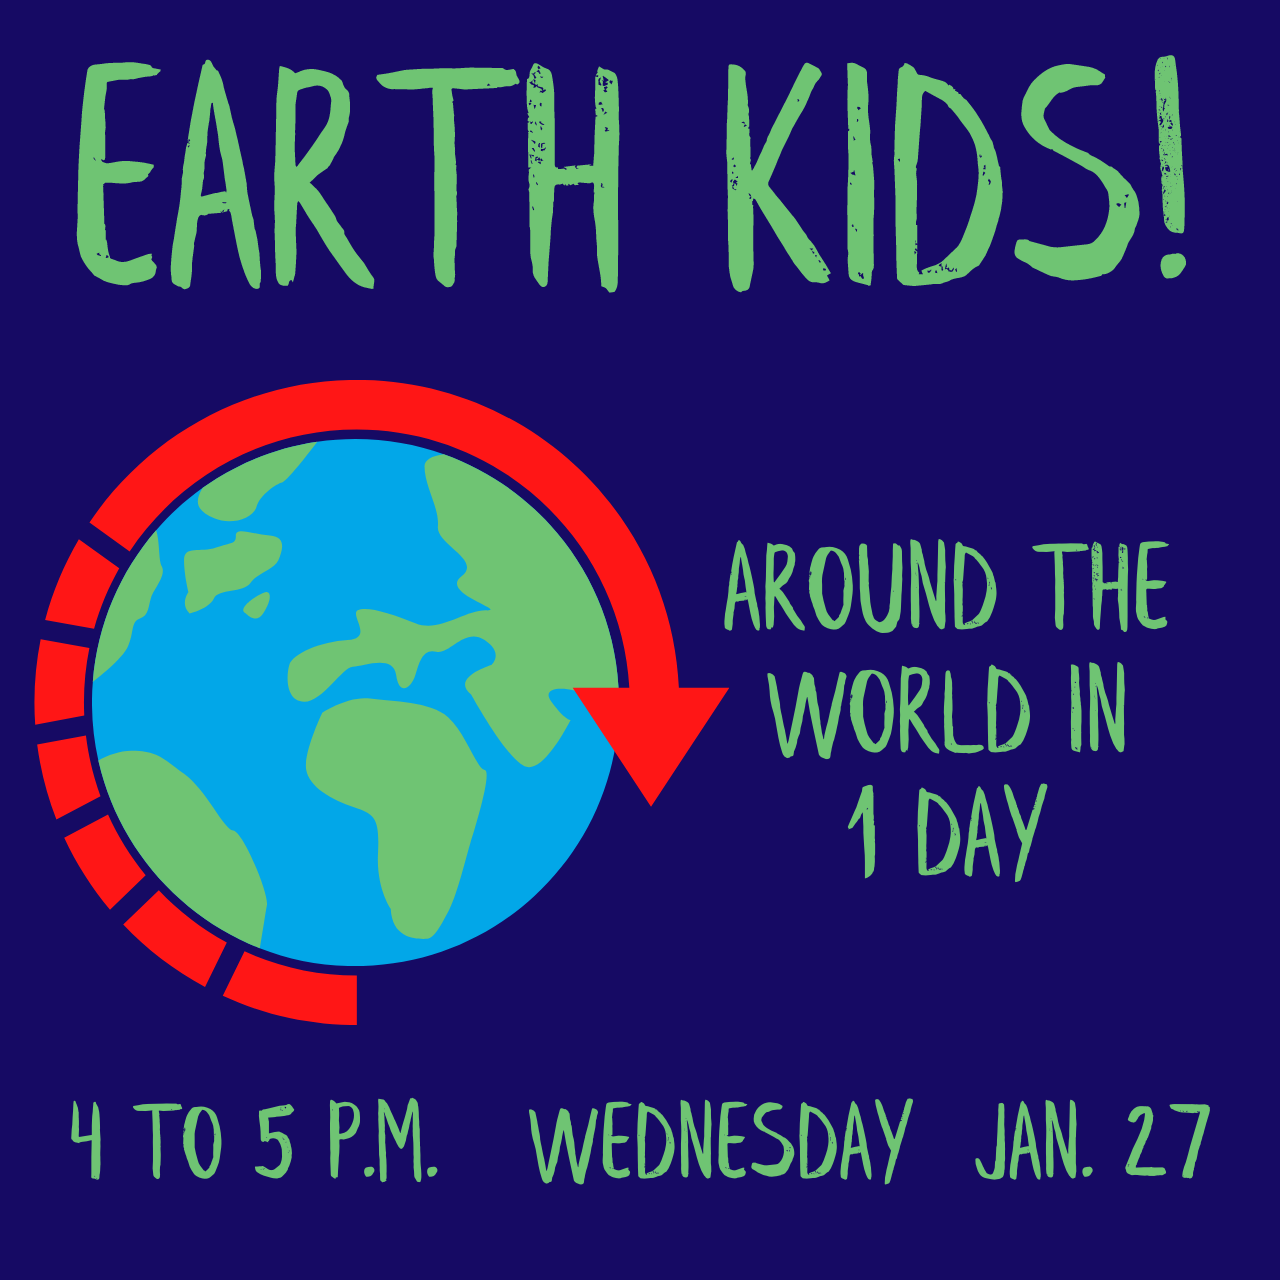 Earth Kids: Around the World in 1 Day!